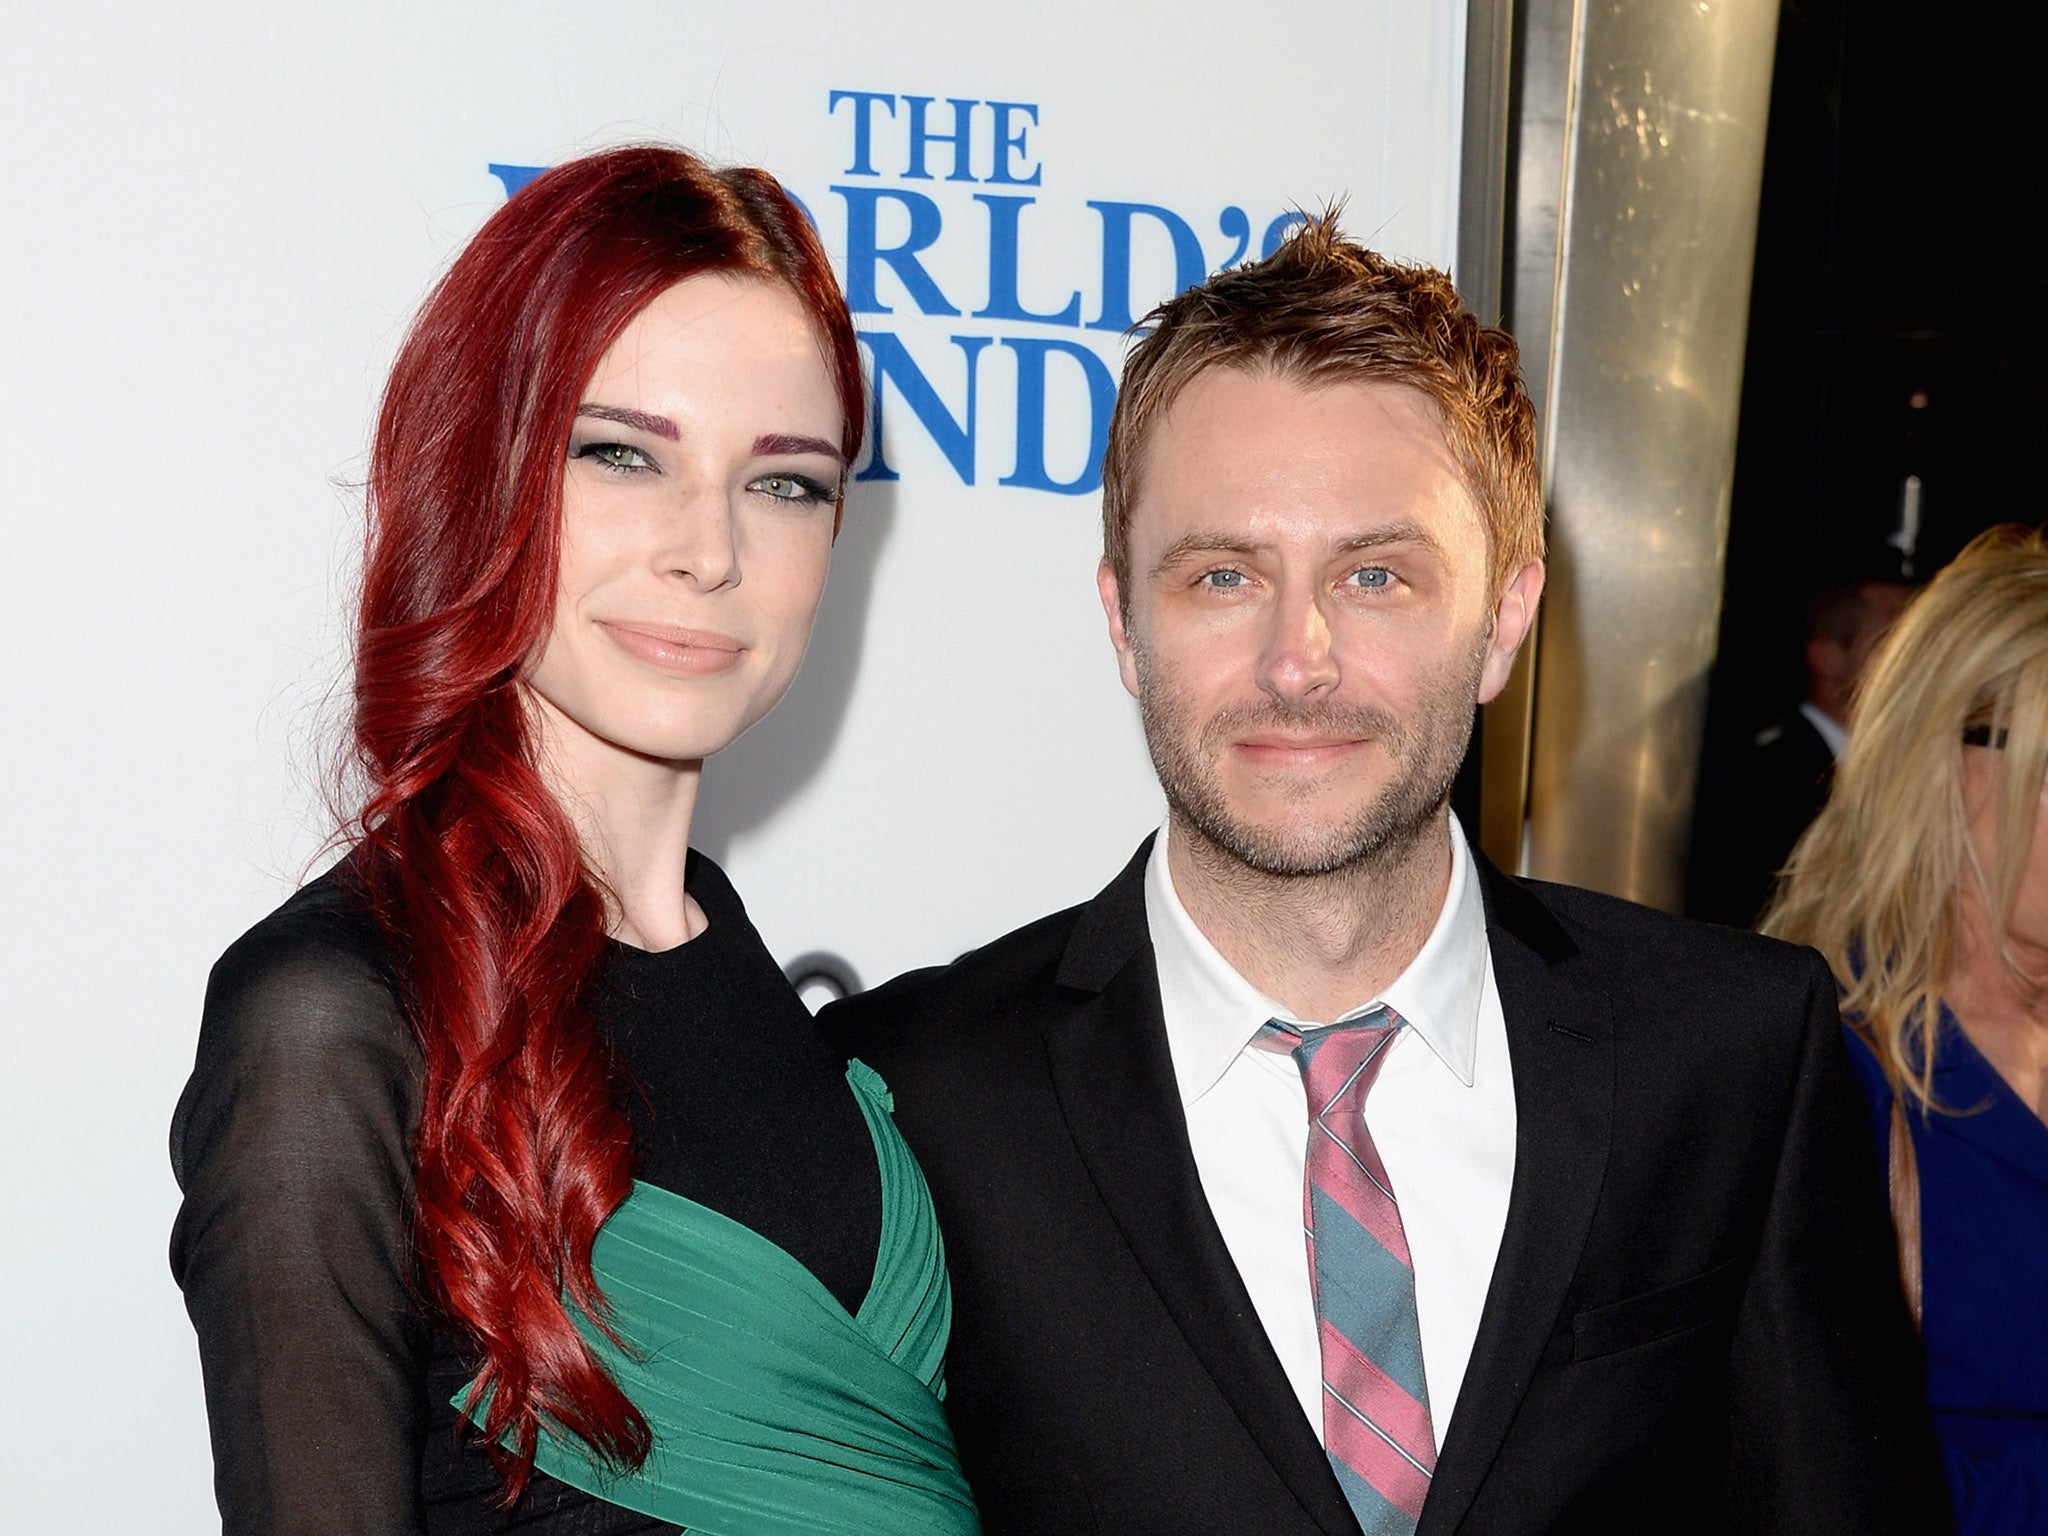 Actress Chloe Dykstra and comedian Chris Hardwick arrive at the premiere of Focus Features' "The World's End" at ArcLight Cinemas Cinerama Dome on August 21, 2013 in Hollywood, California.